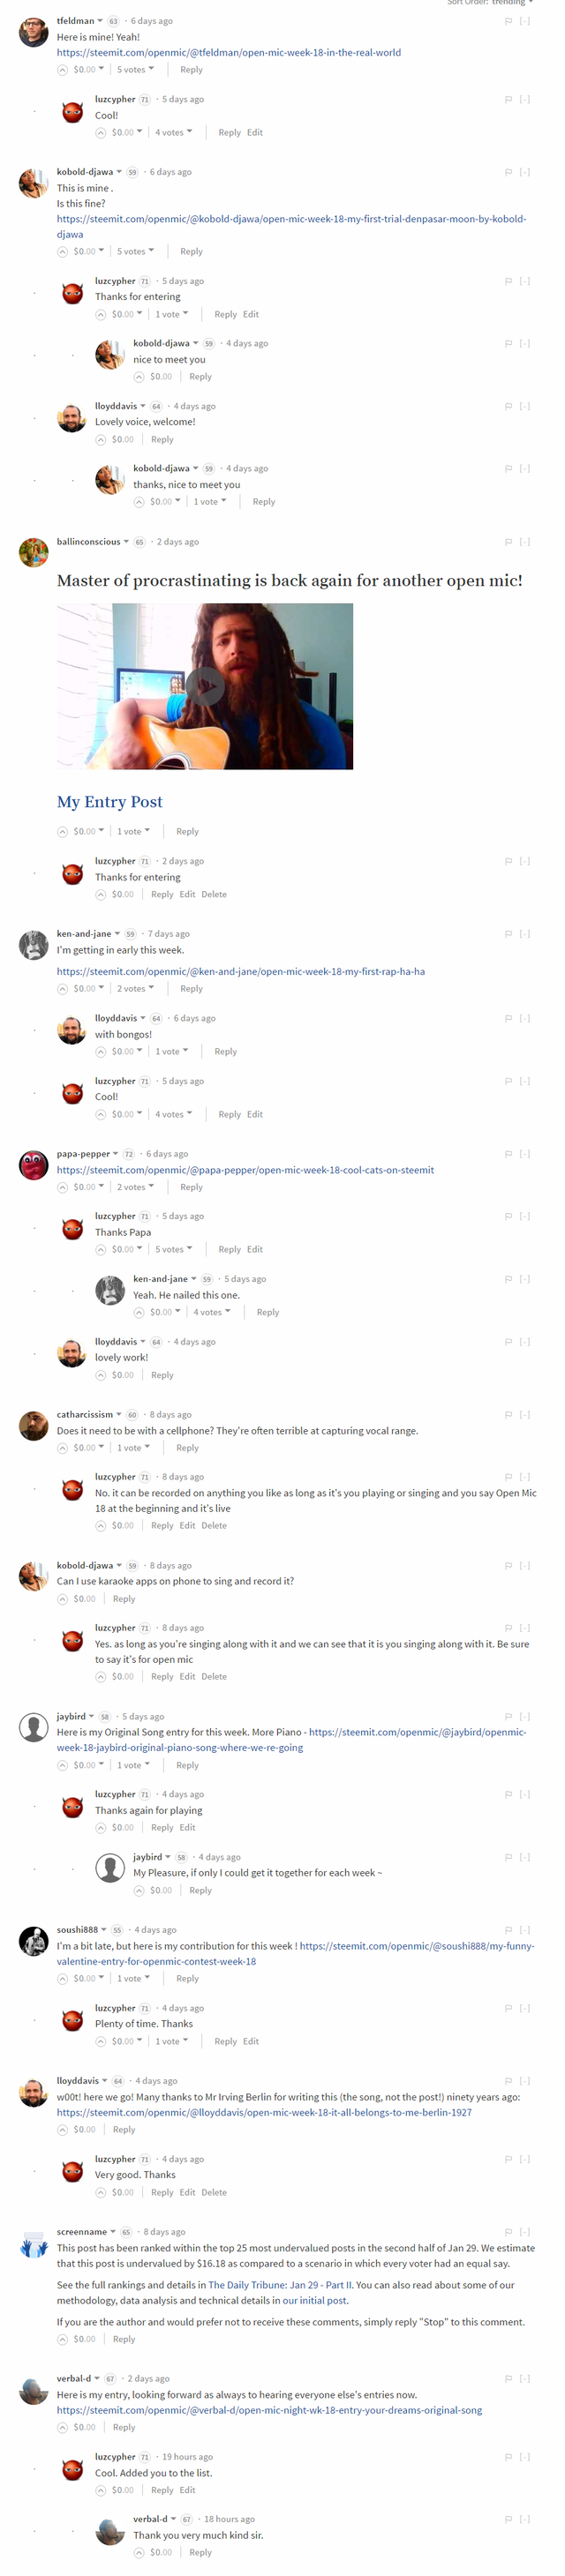 open mic 18 comments.png